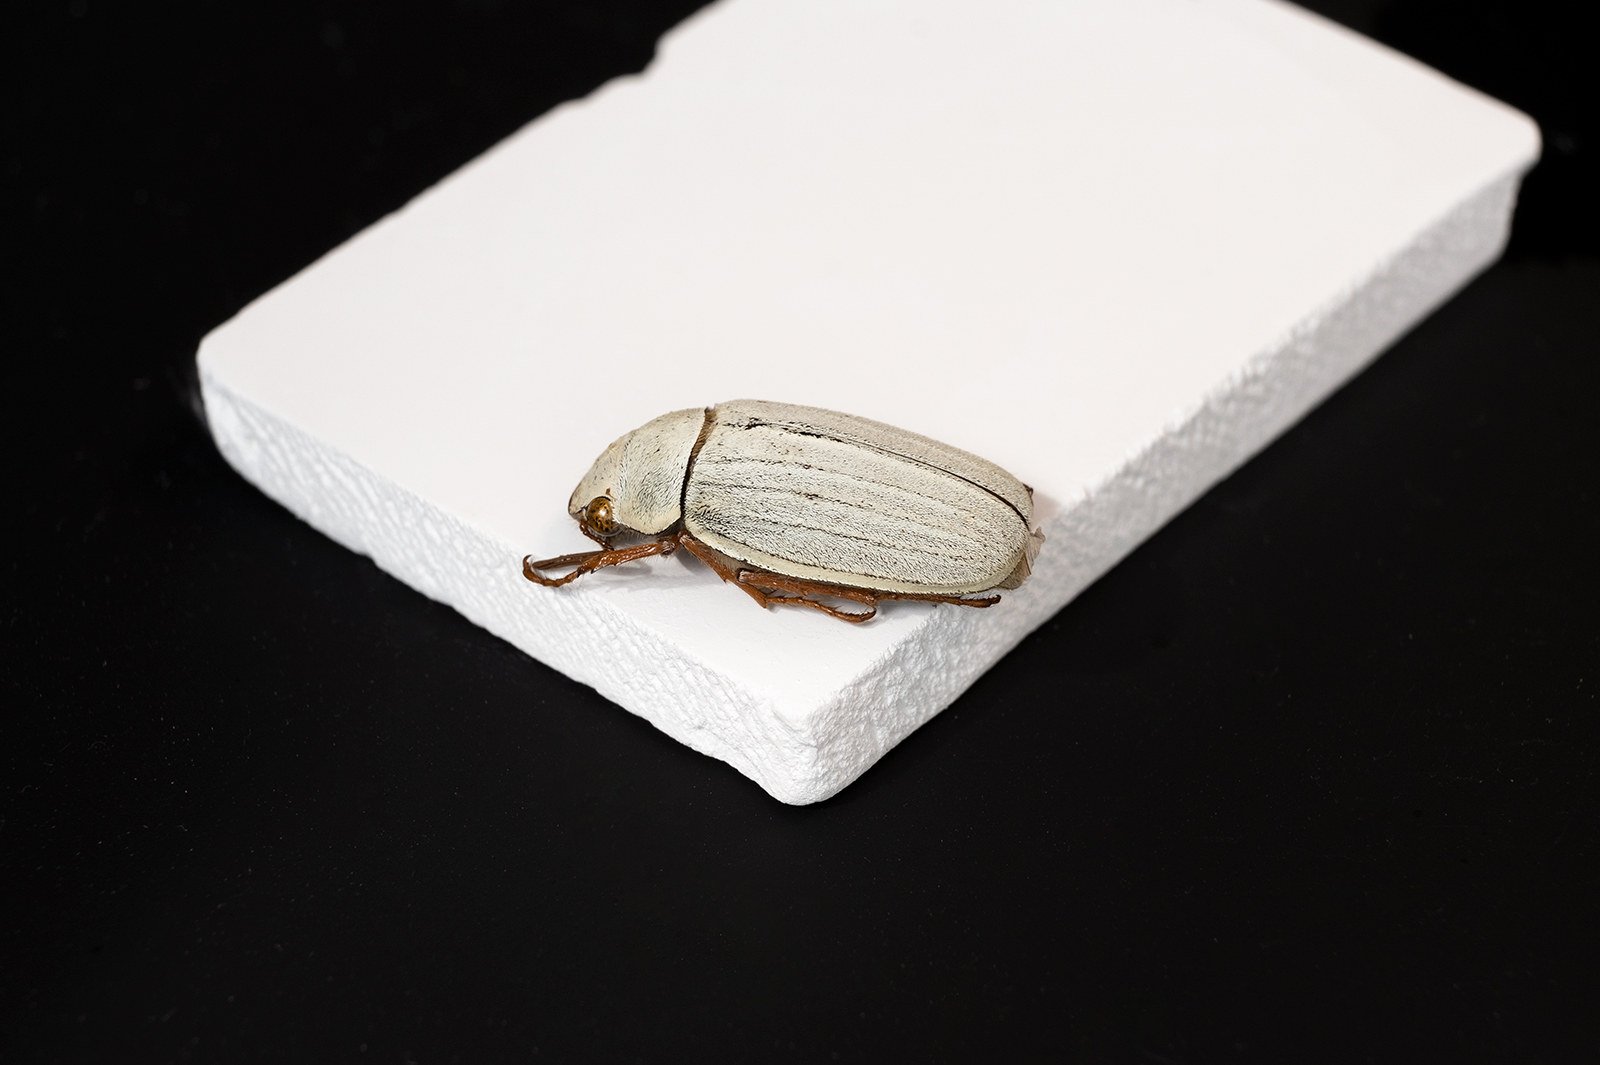 The energy-saving tile mimics the bio-whiteness of the whitest known insect, the Cyphochilus beetle native to Southeast Asia. Photo: City University of Hong Kong